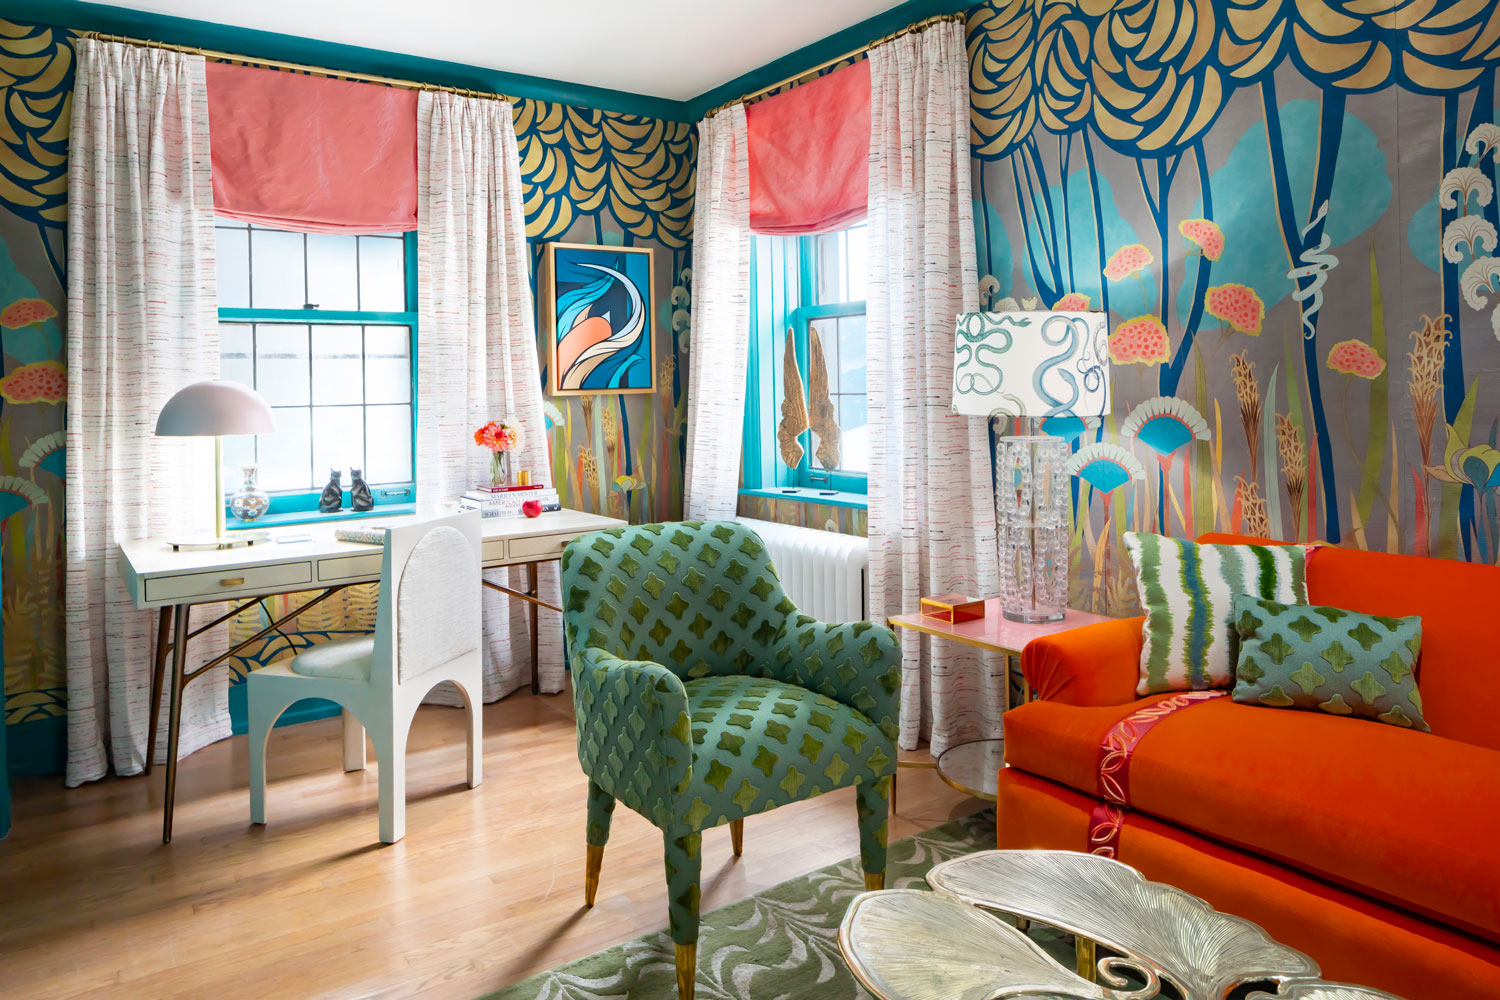 courtney mcleod colorful living room with teal trim